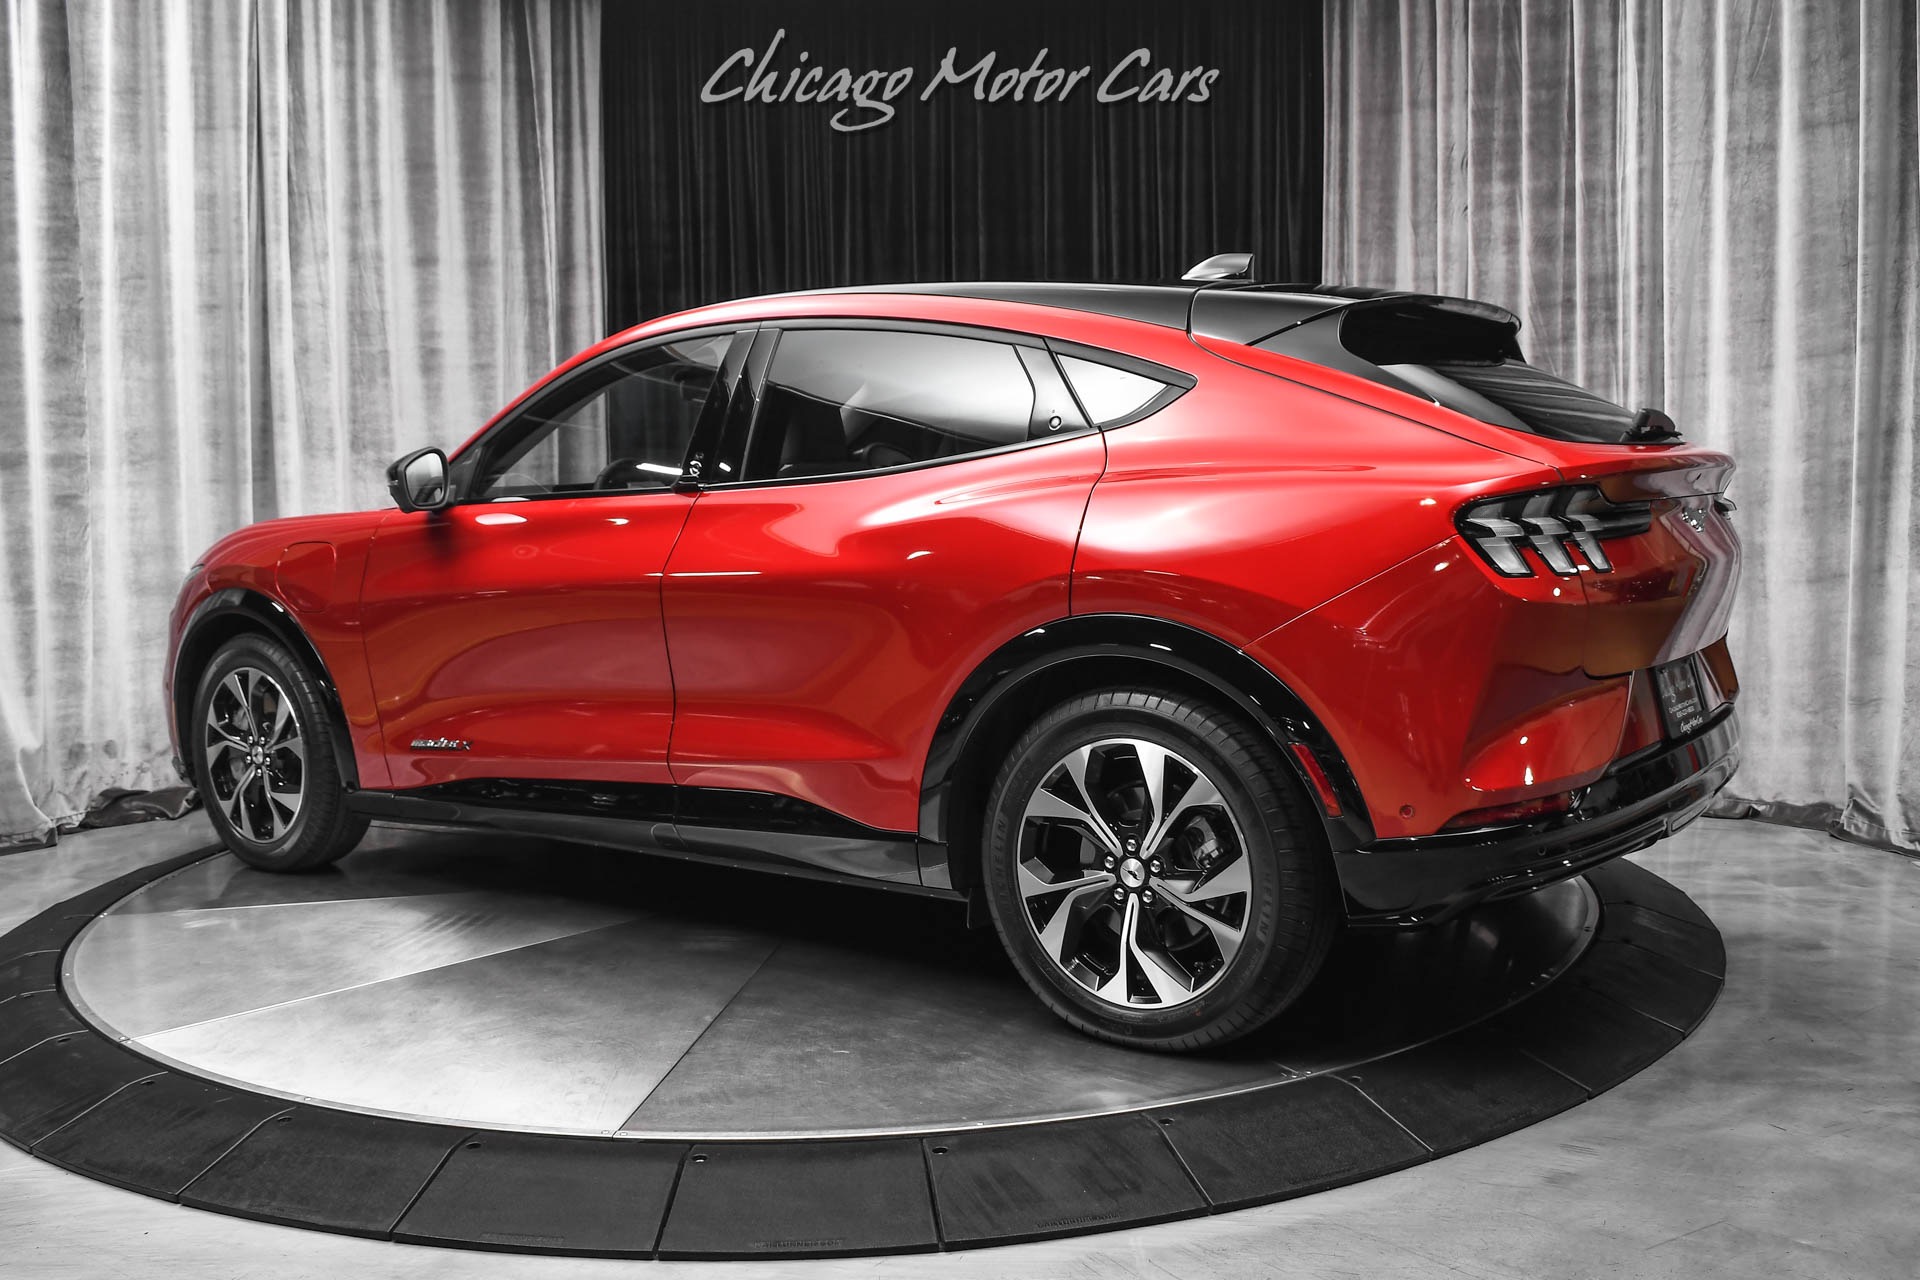 Used-2022-Ford-Mustang-Mach-E-Premium-SUV-91KWH-Extended-Battery-CoPilot-360-LOADED